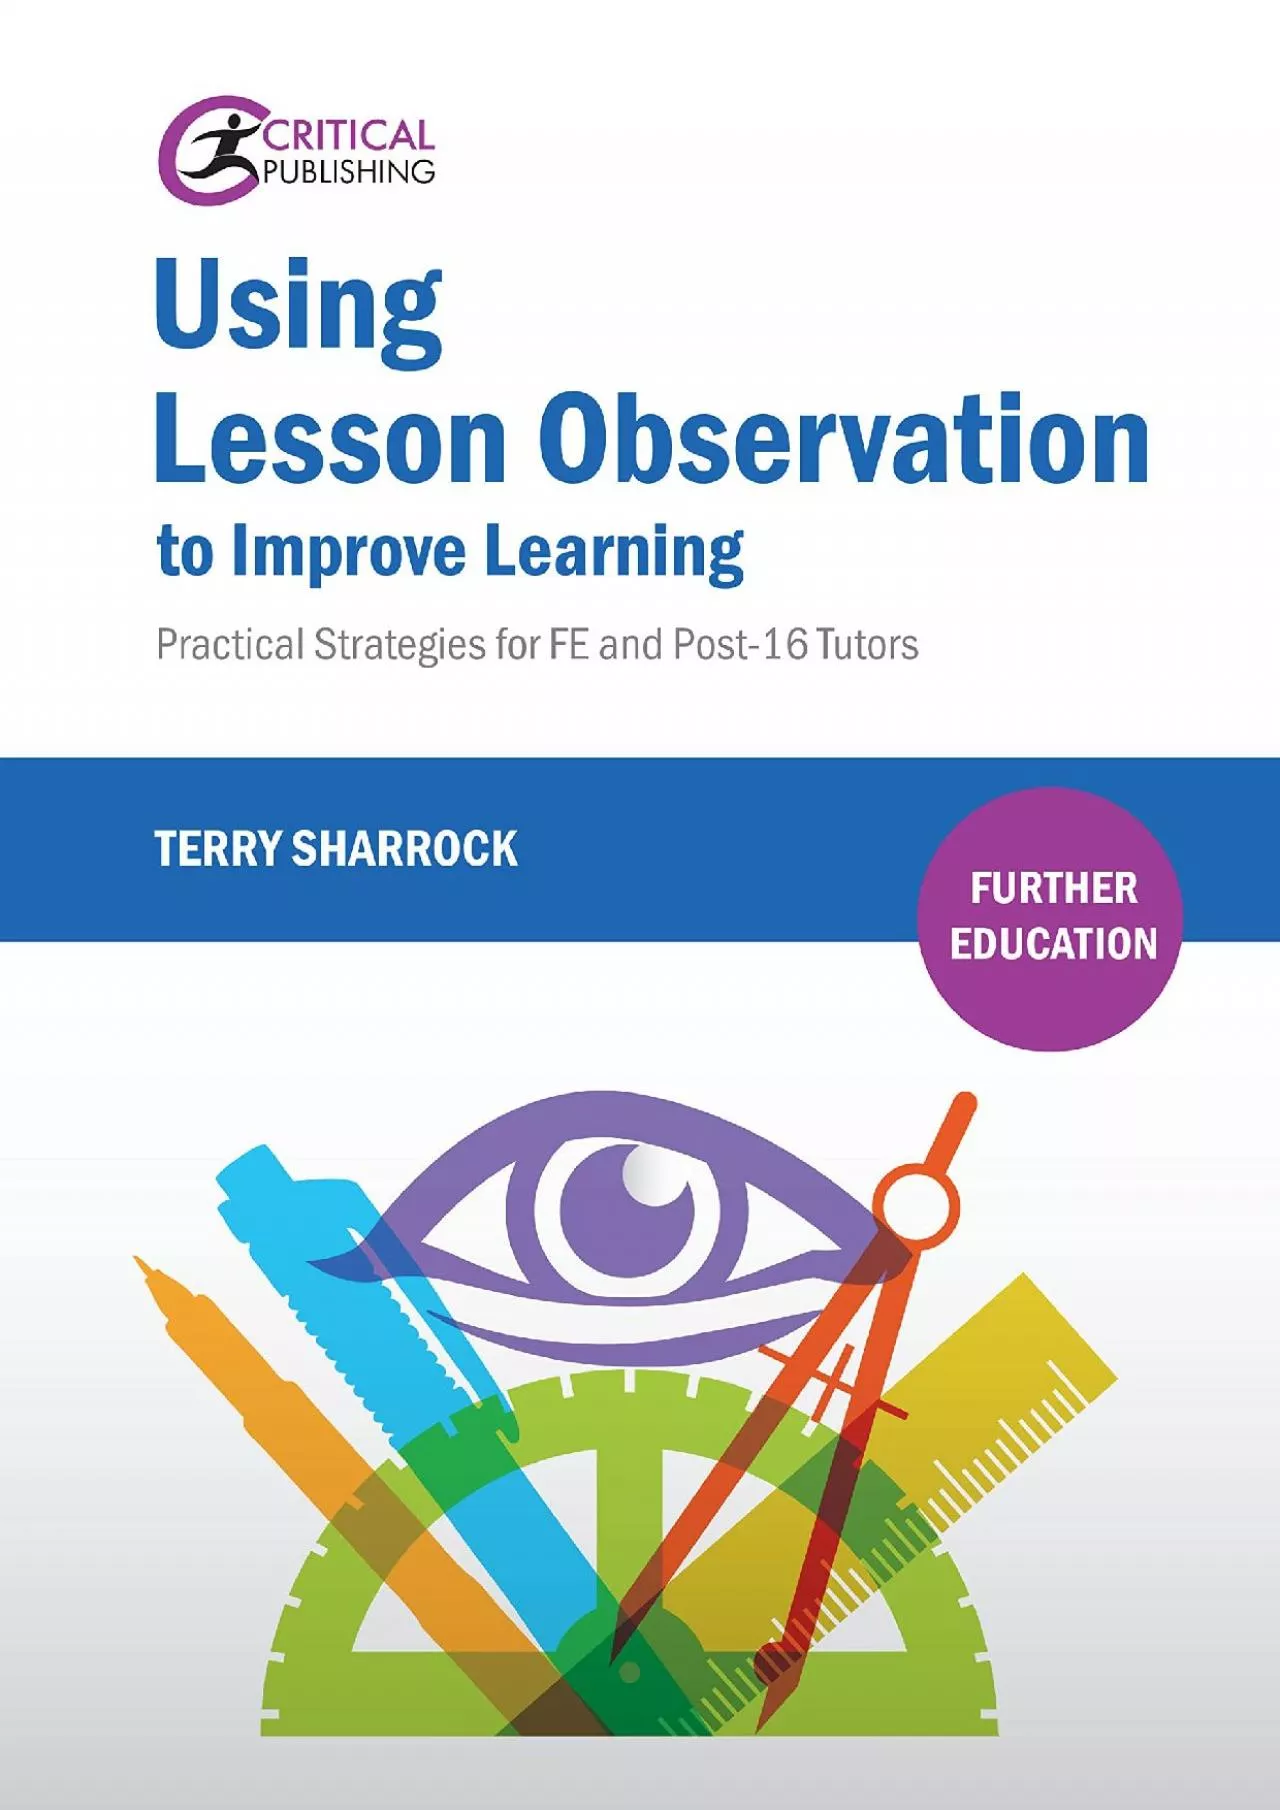 [DOWNLOAD] Using Lesson Observation to Improve Learning: Practical Strategies for FE and